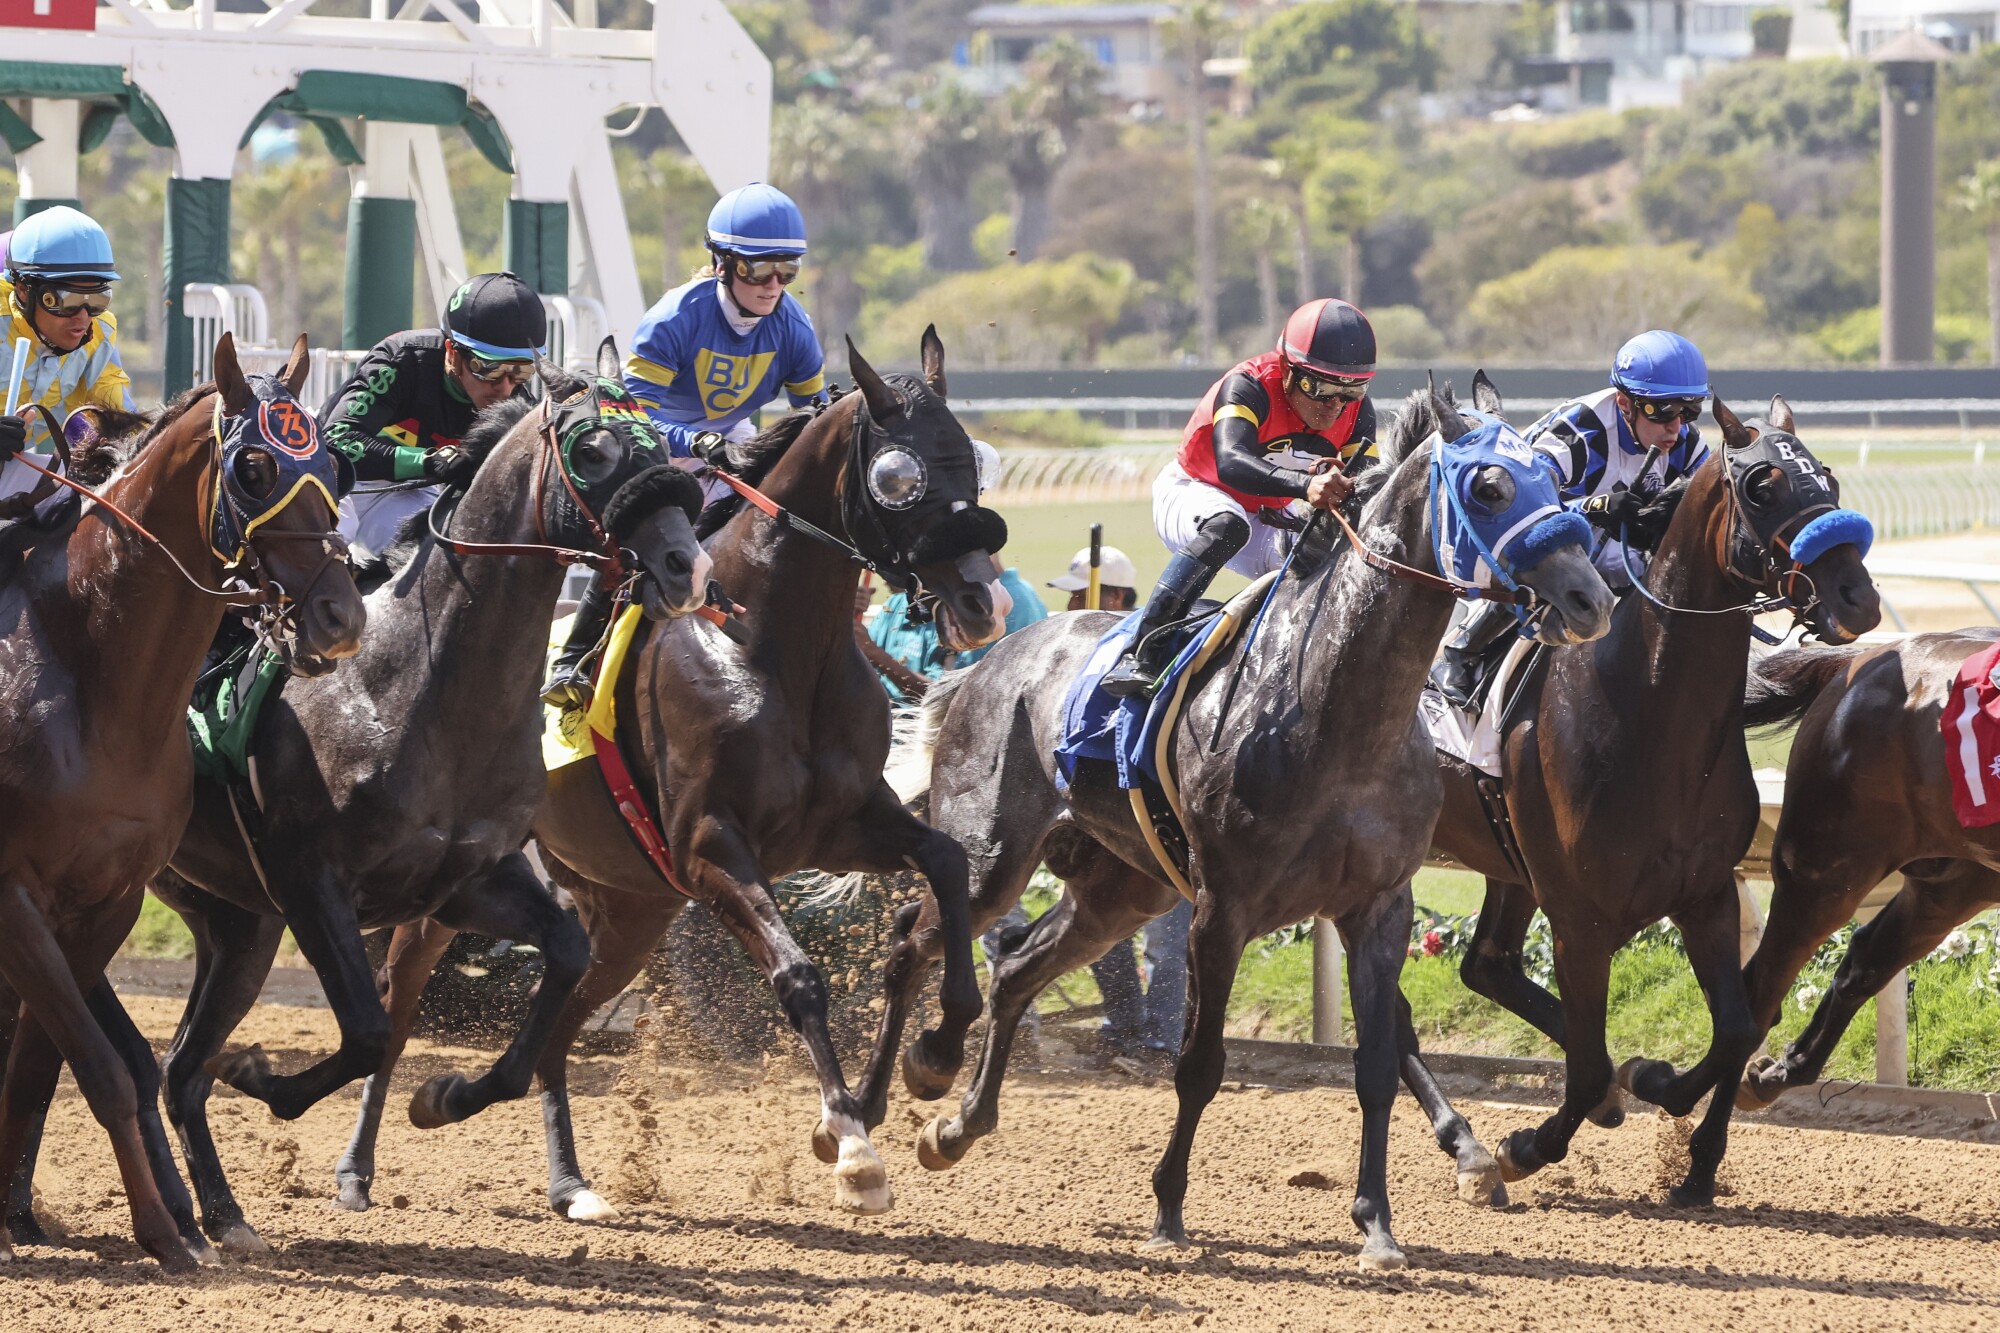 Horses leave the starting gate in the 4th race on Opening Day at the Del Mar Racetrack.